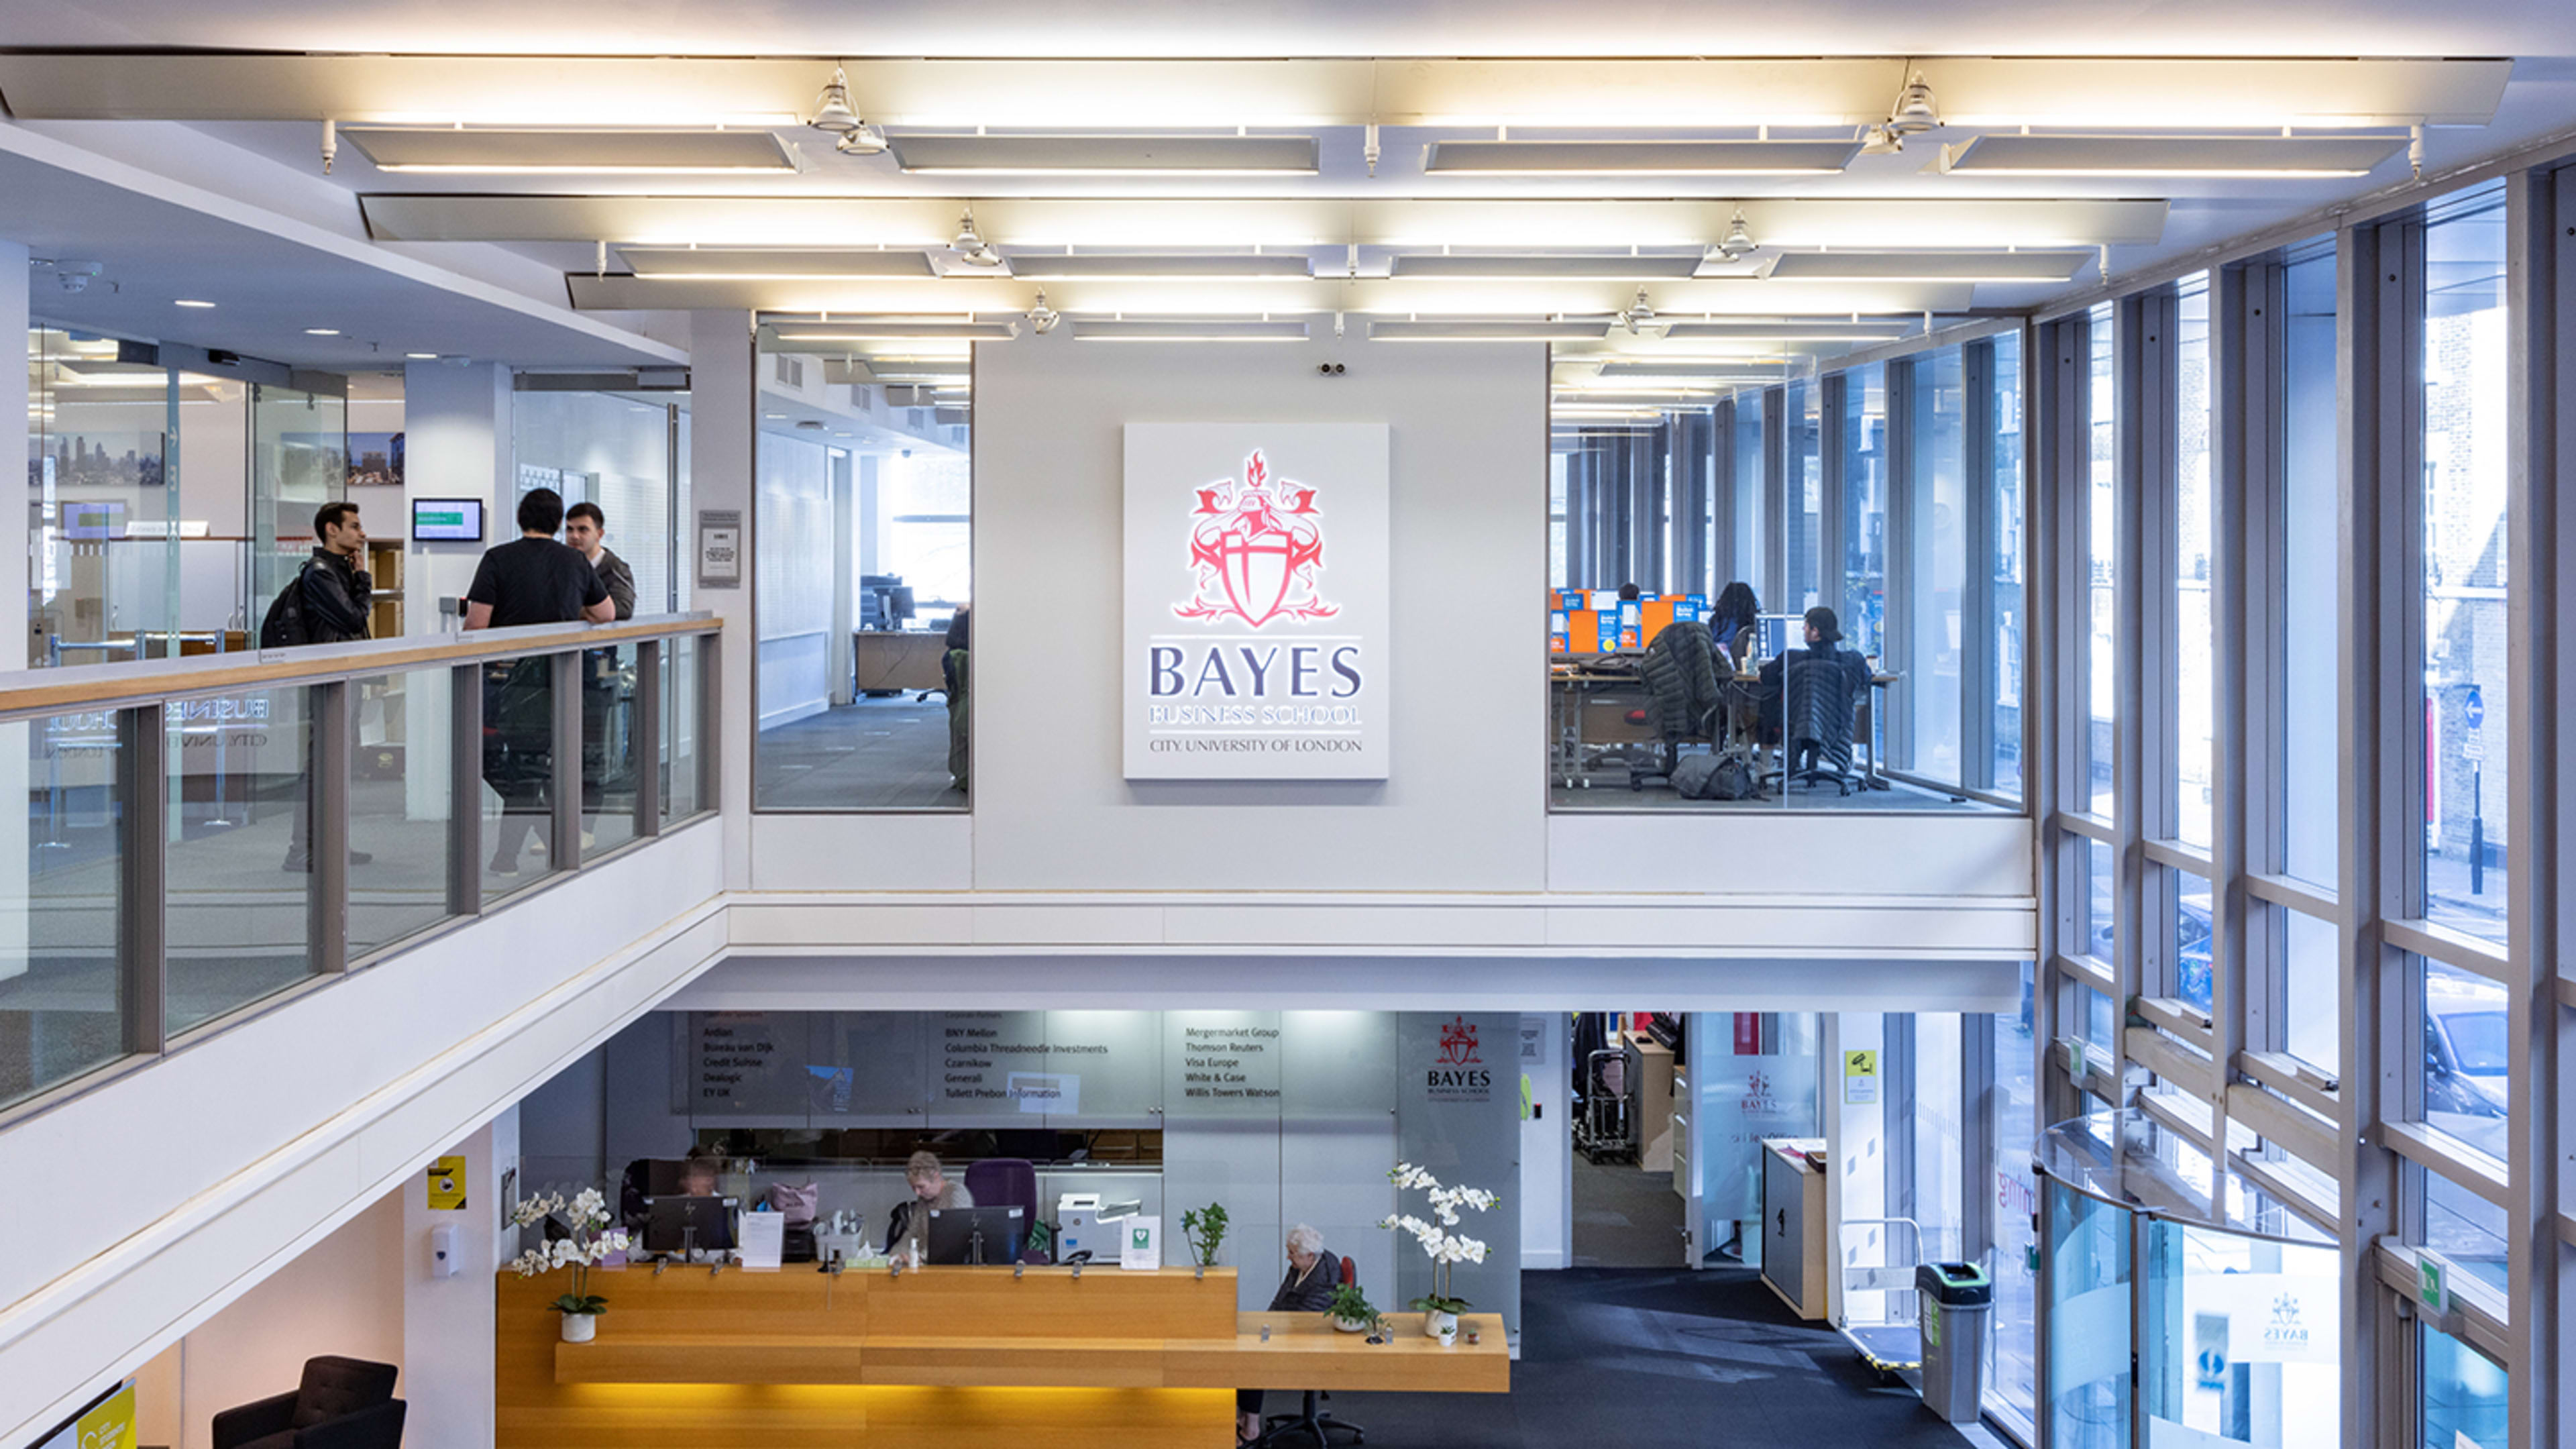 BAYES Business School